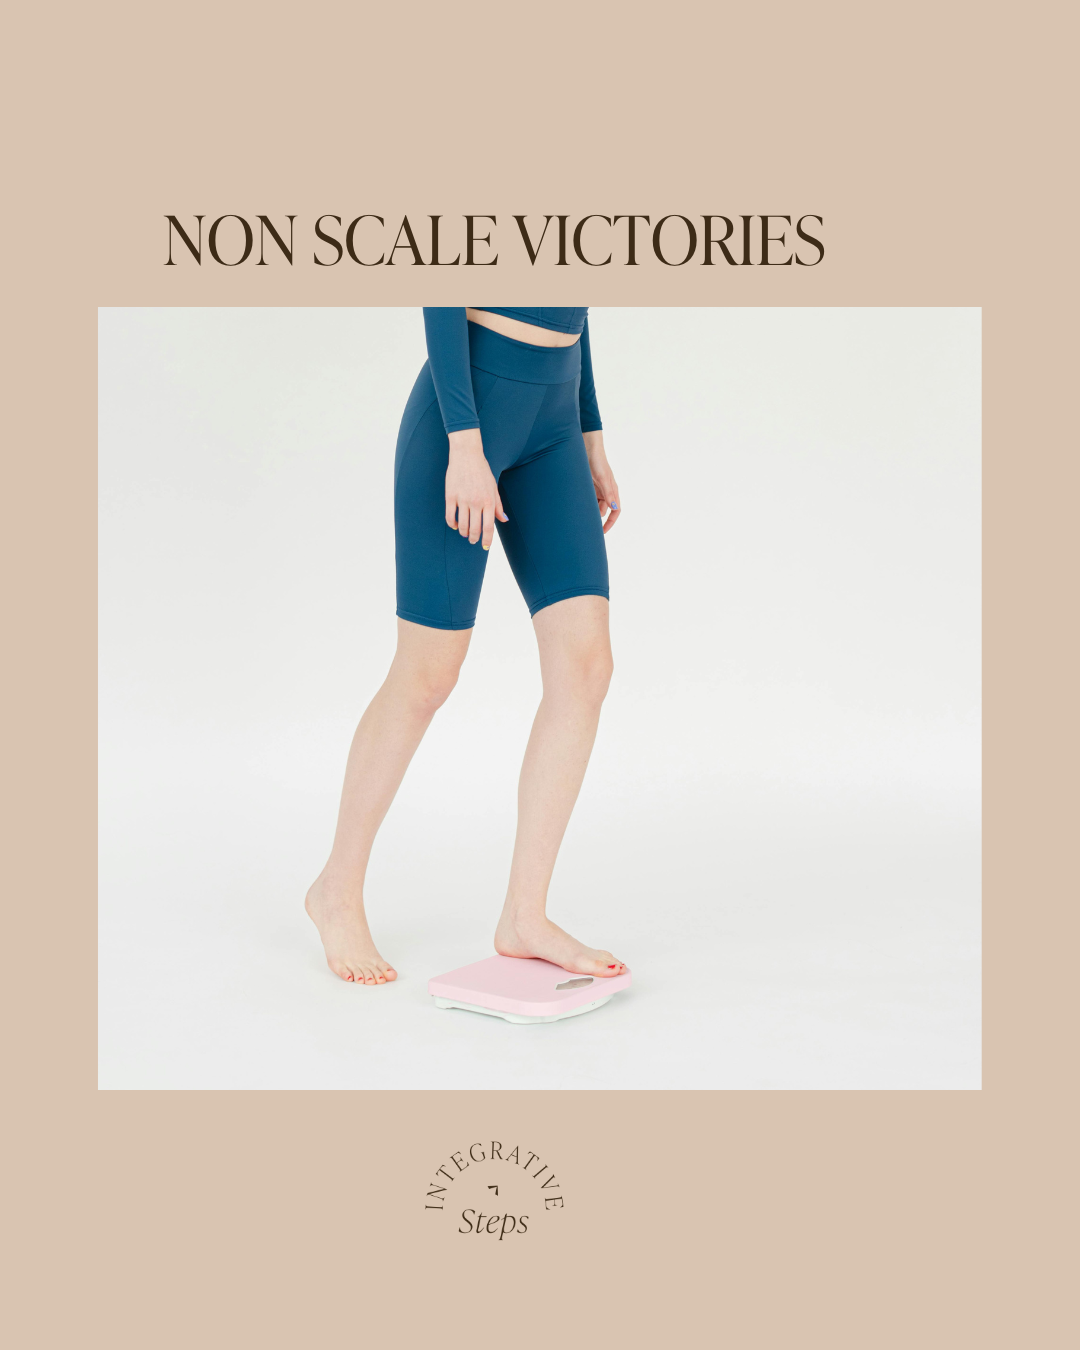 non scale victories motivation for weight loss